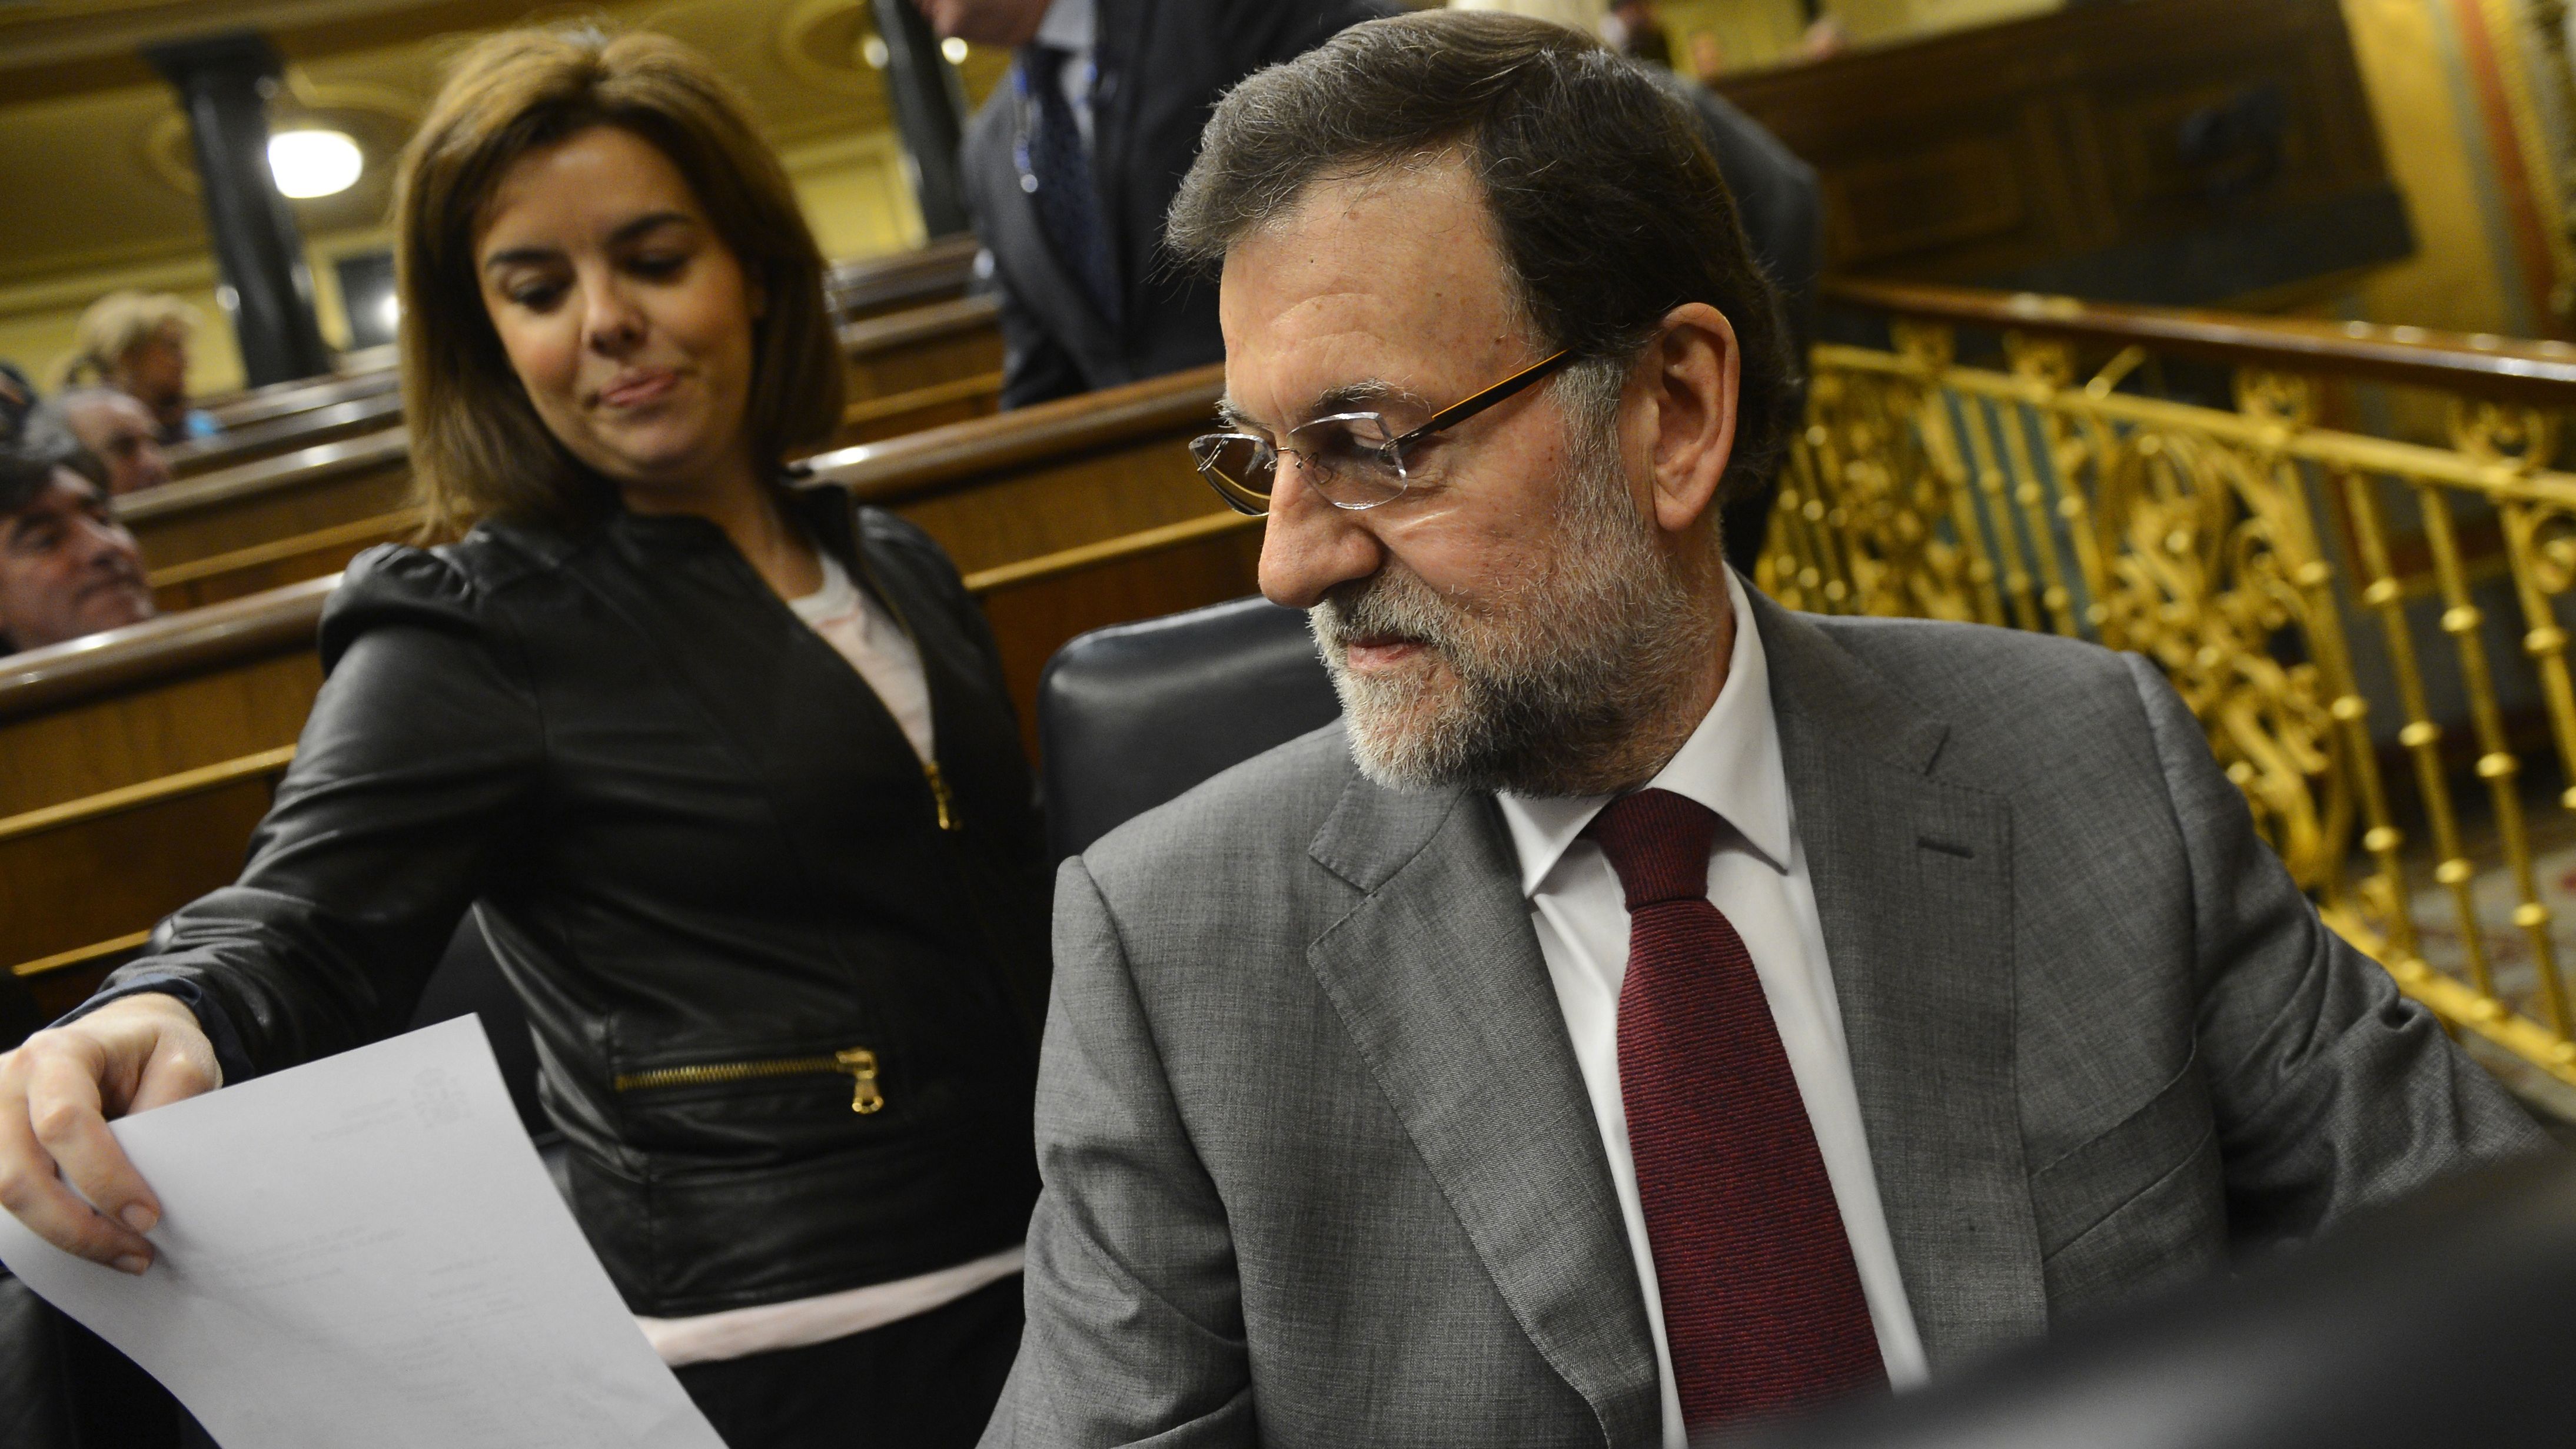 Spanish Prime Miniister Mariano Rajoy (R) attends a Parliament session in Madrid on January 30, 2013. 